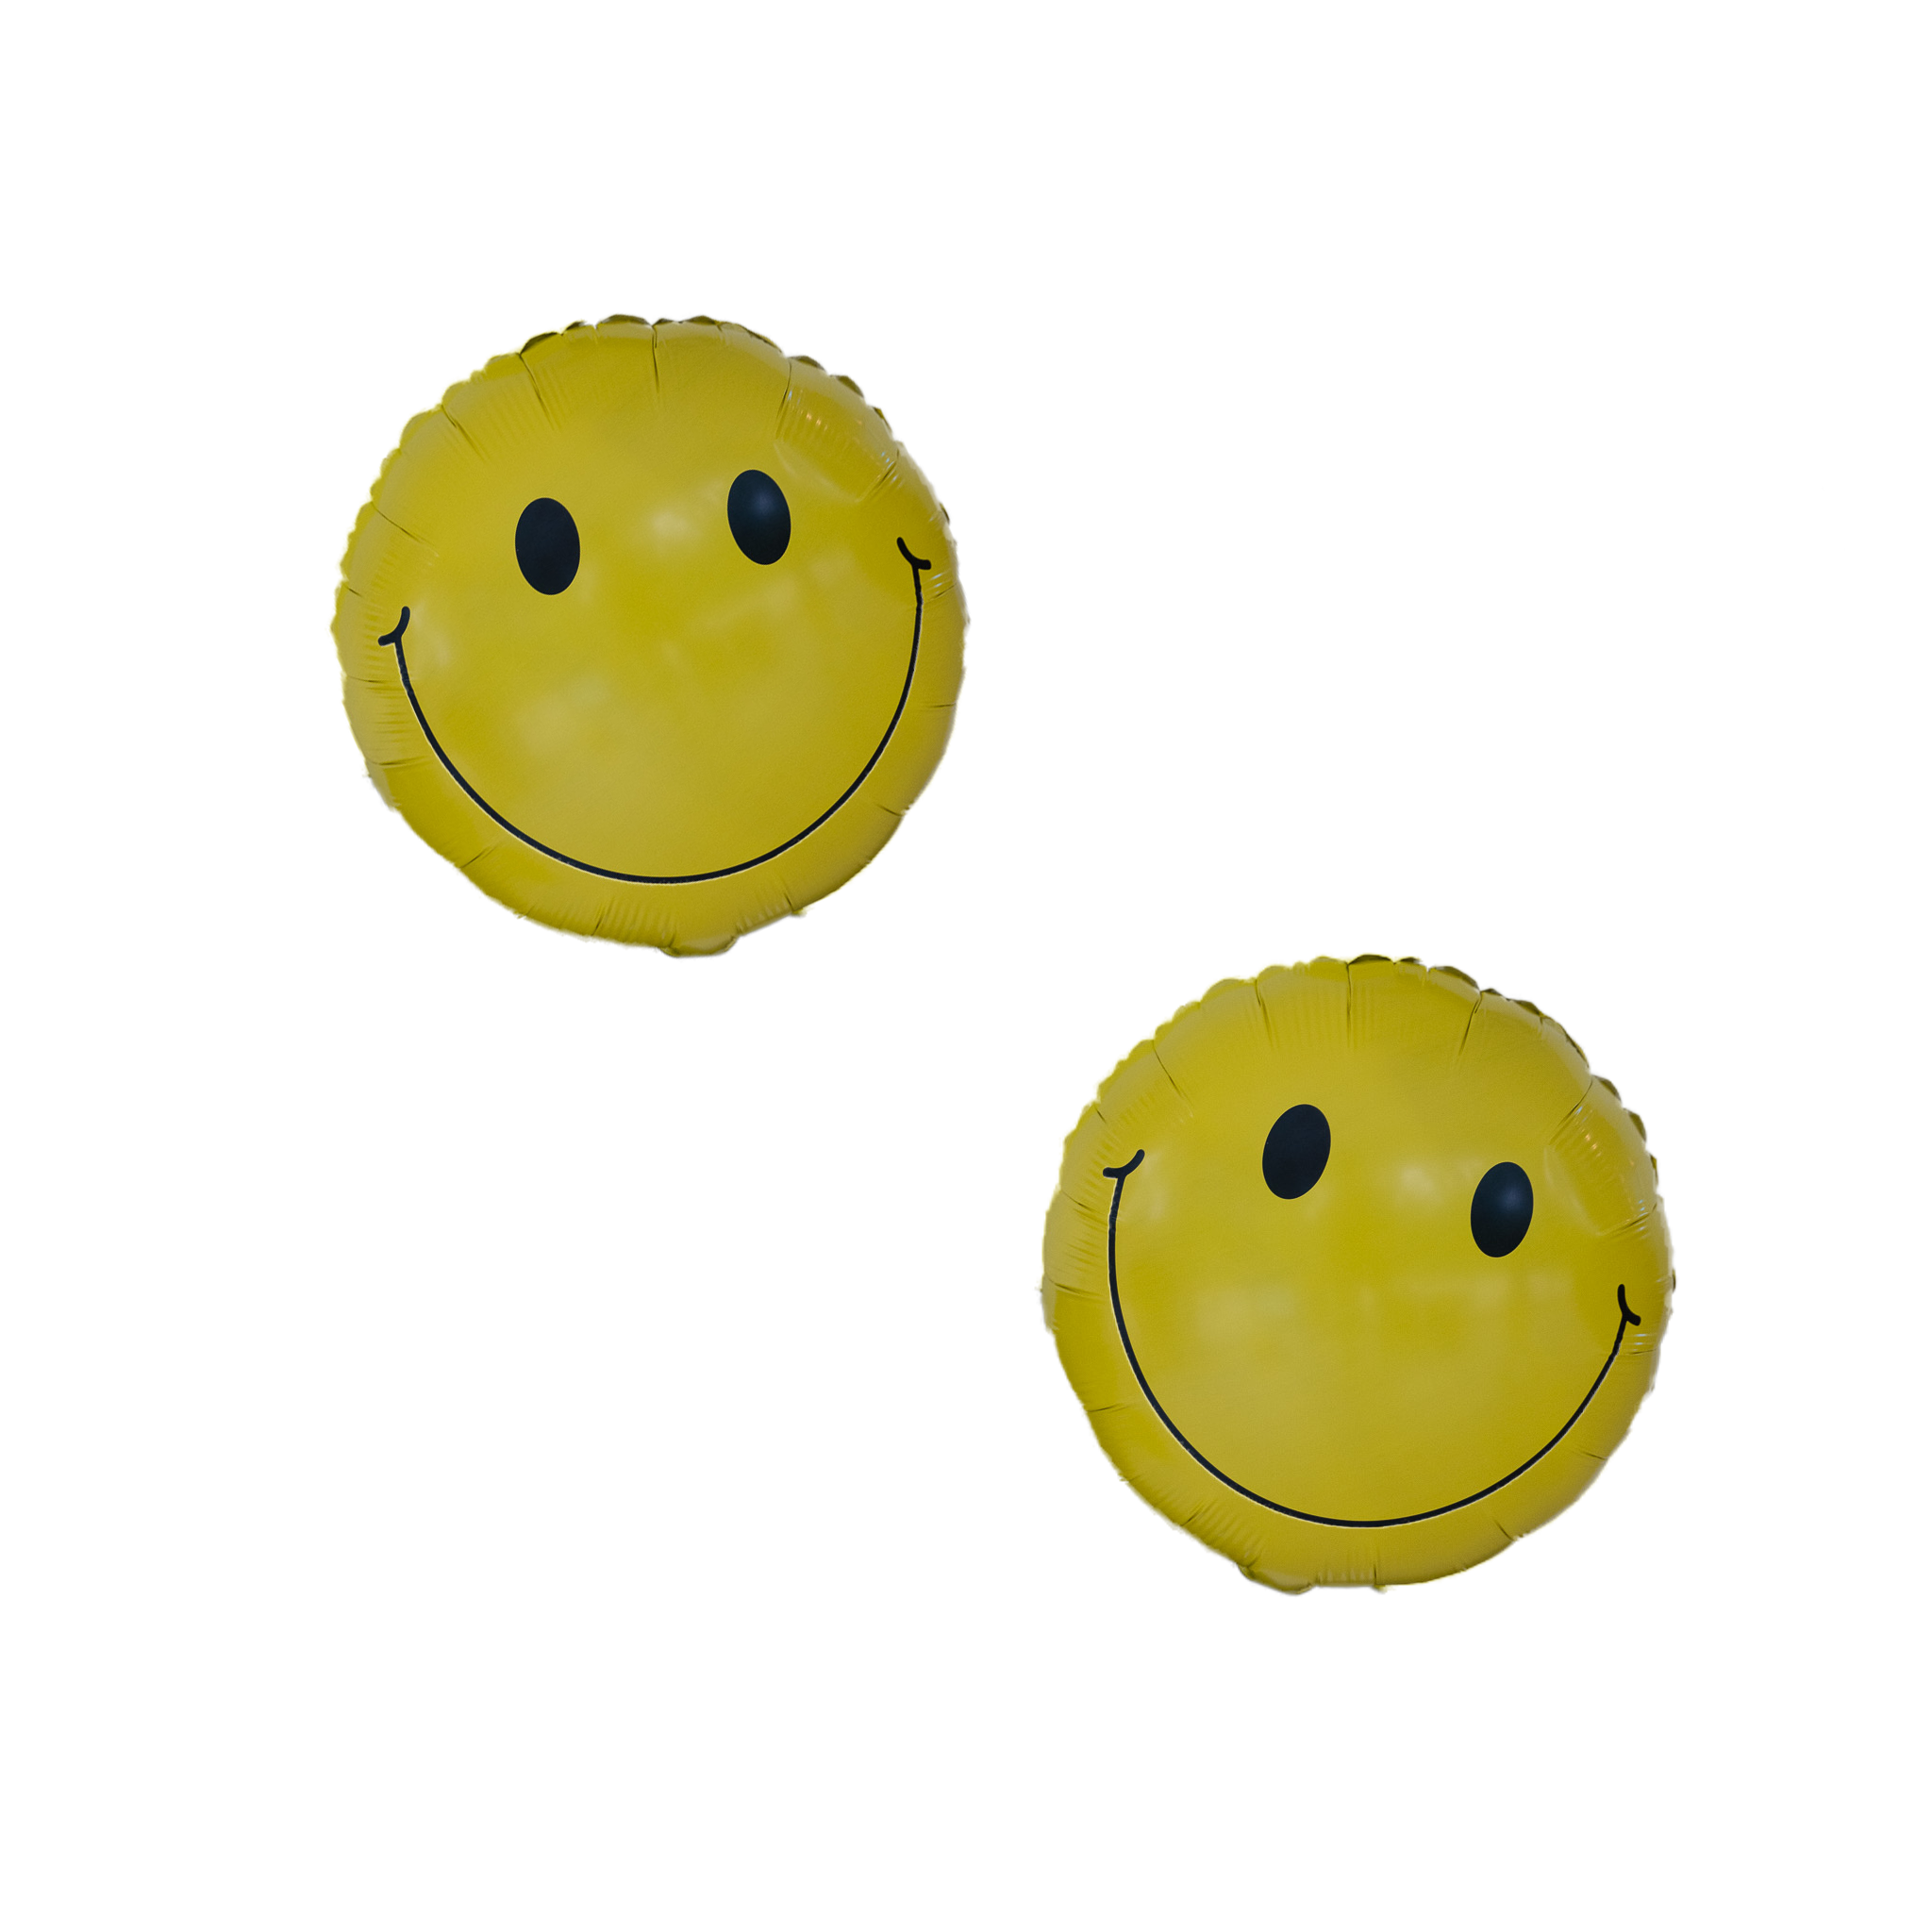 Smiley Balloons (Pack of 2)